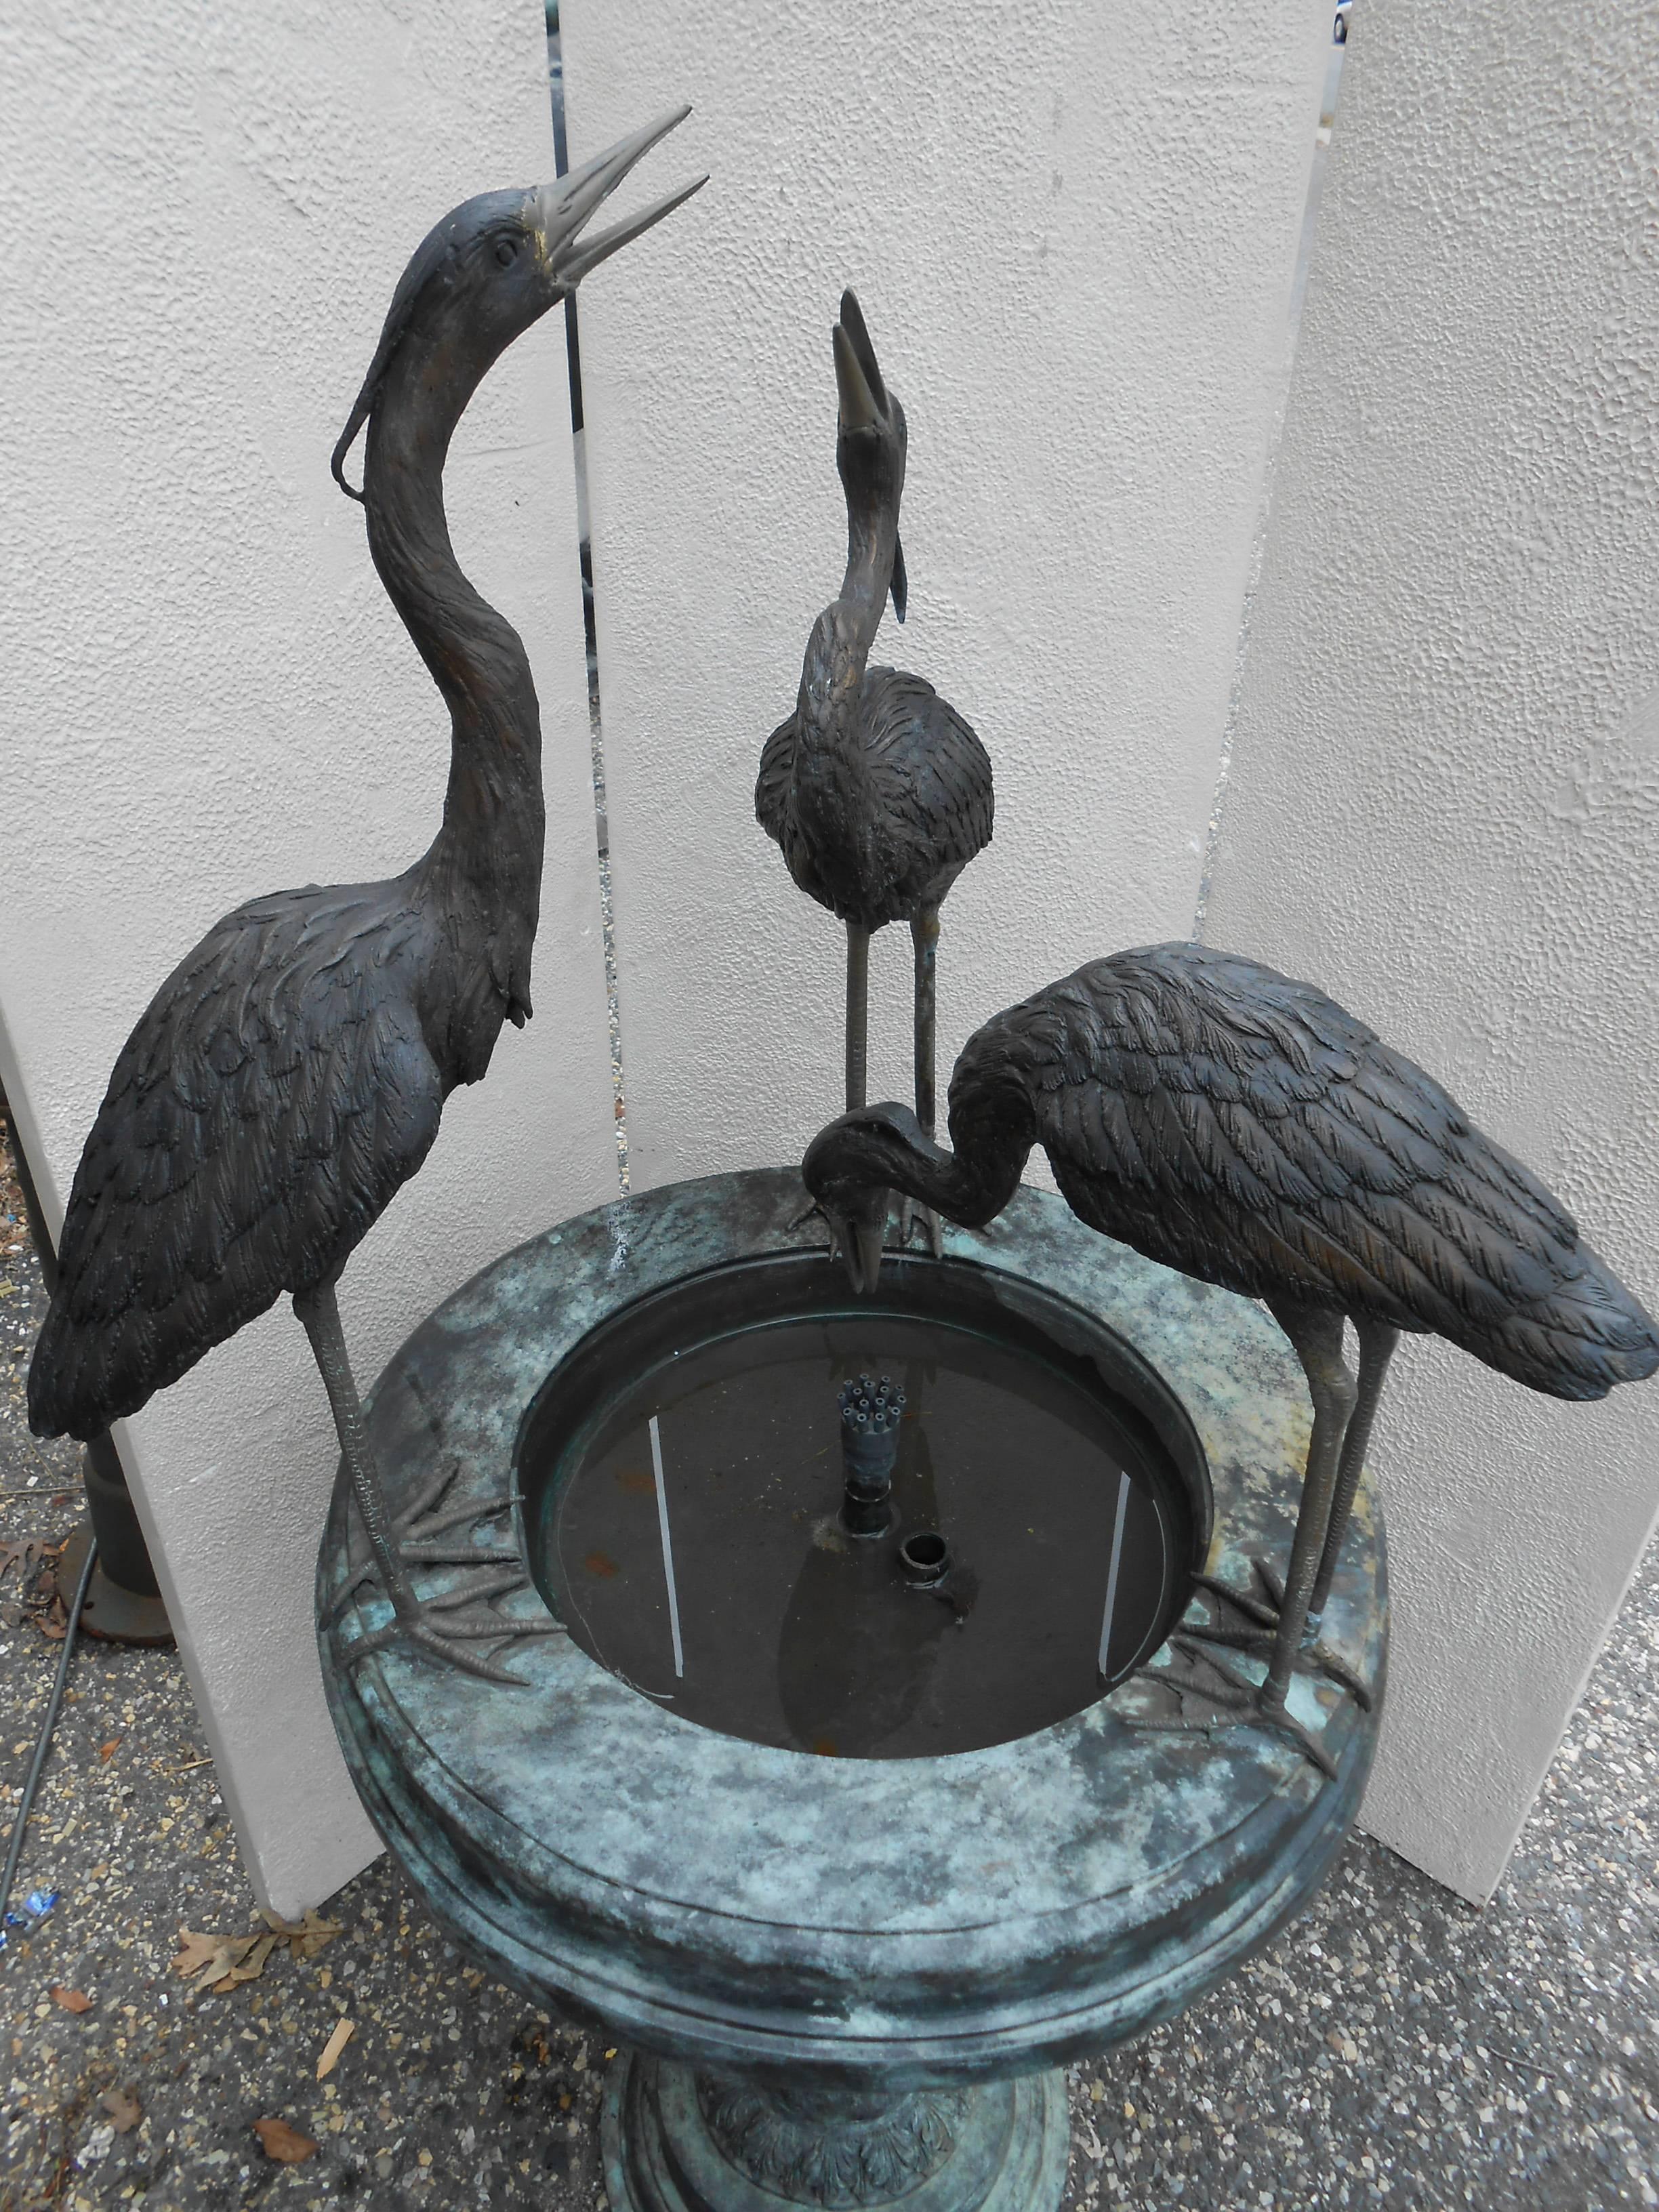 This stunning bronze fountain features three egrets or herons on the edges of a round reservoir with a multiple hole spout in the center. The sculpted pedestal base and gorgeous patinated finish add to the allure. Exquisite detail from the base all